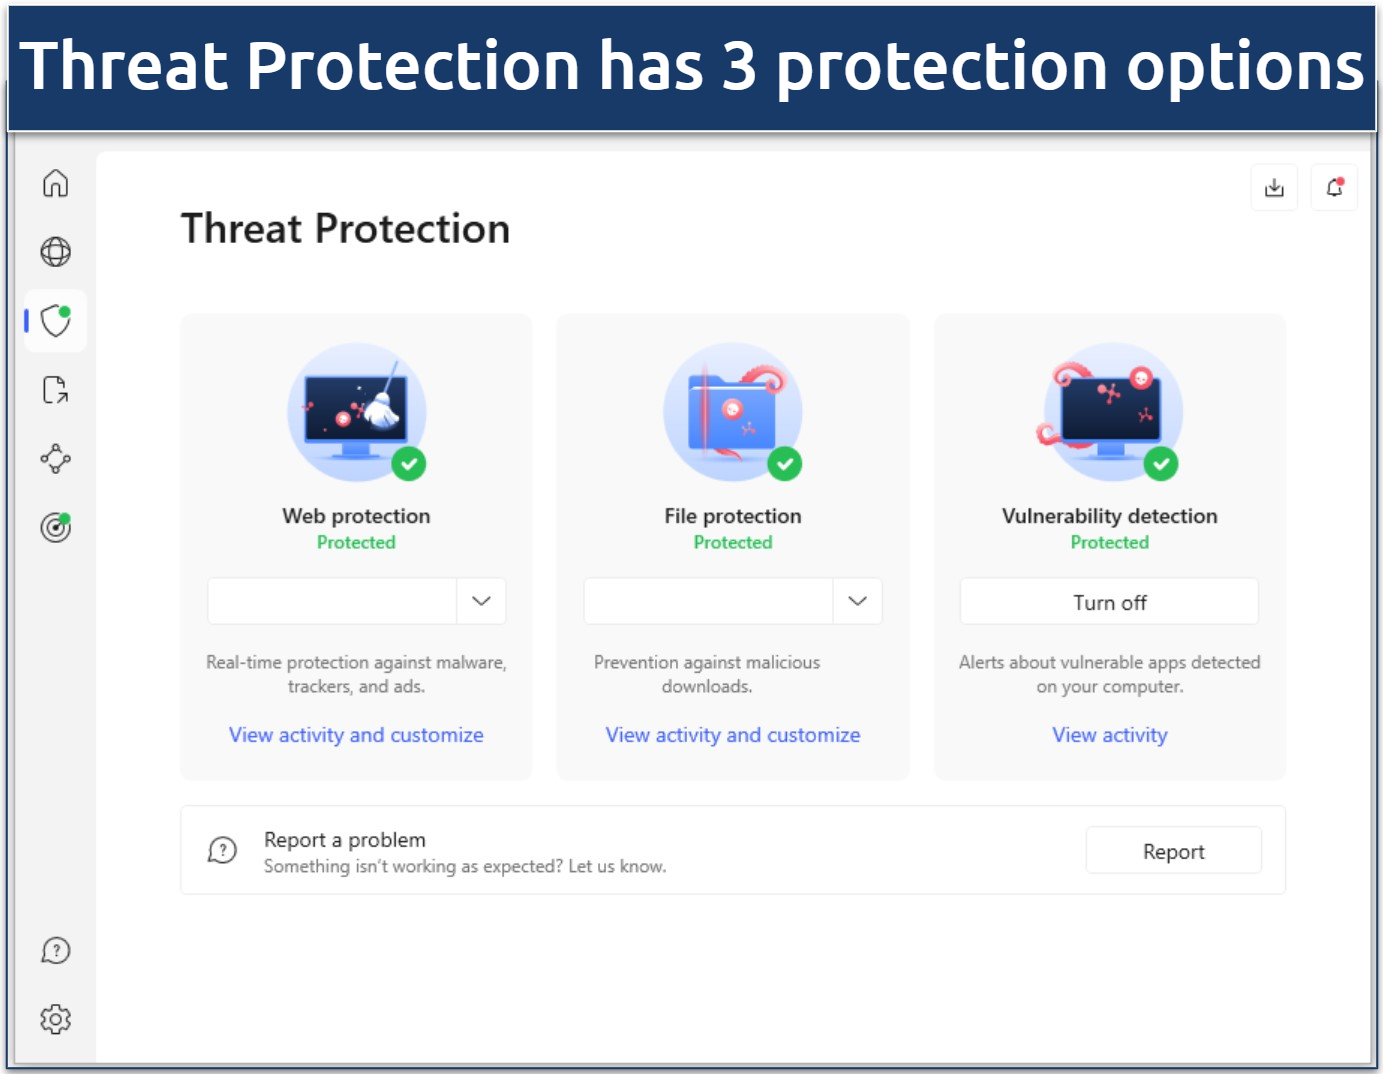 Screenshot of the NordVPN interface showing the Threat Protection feature